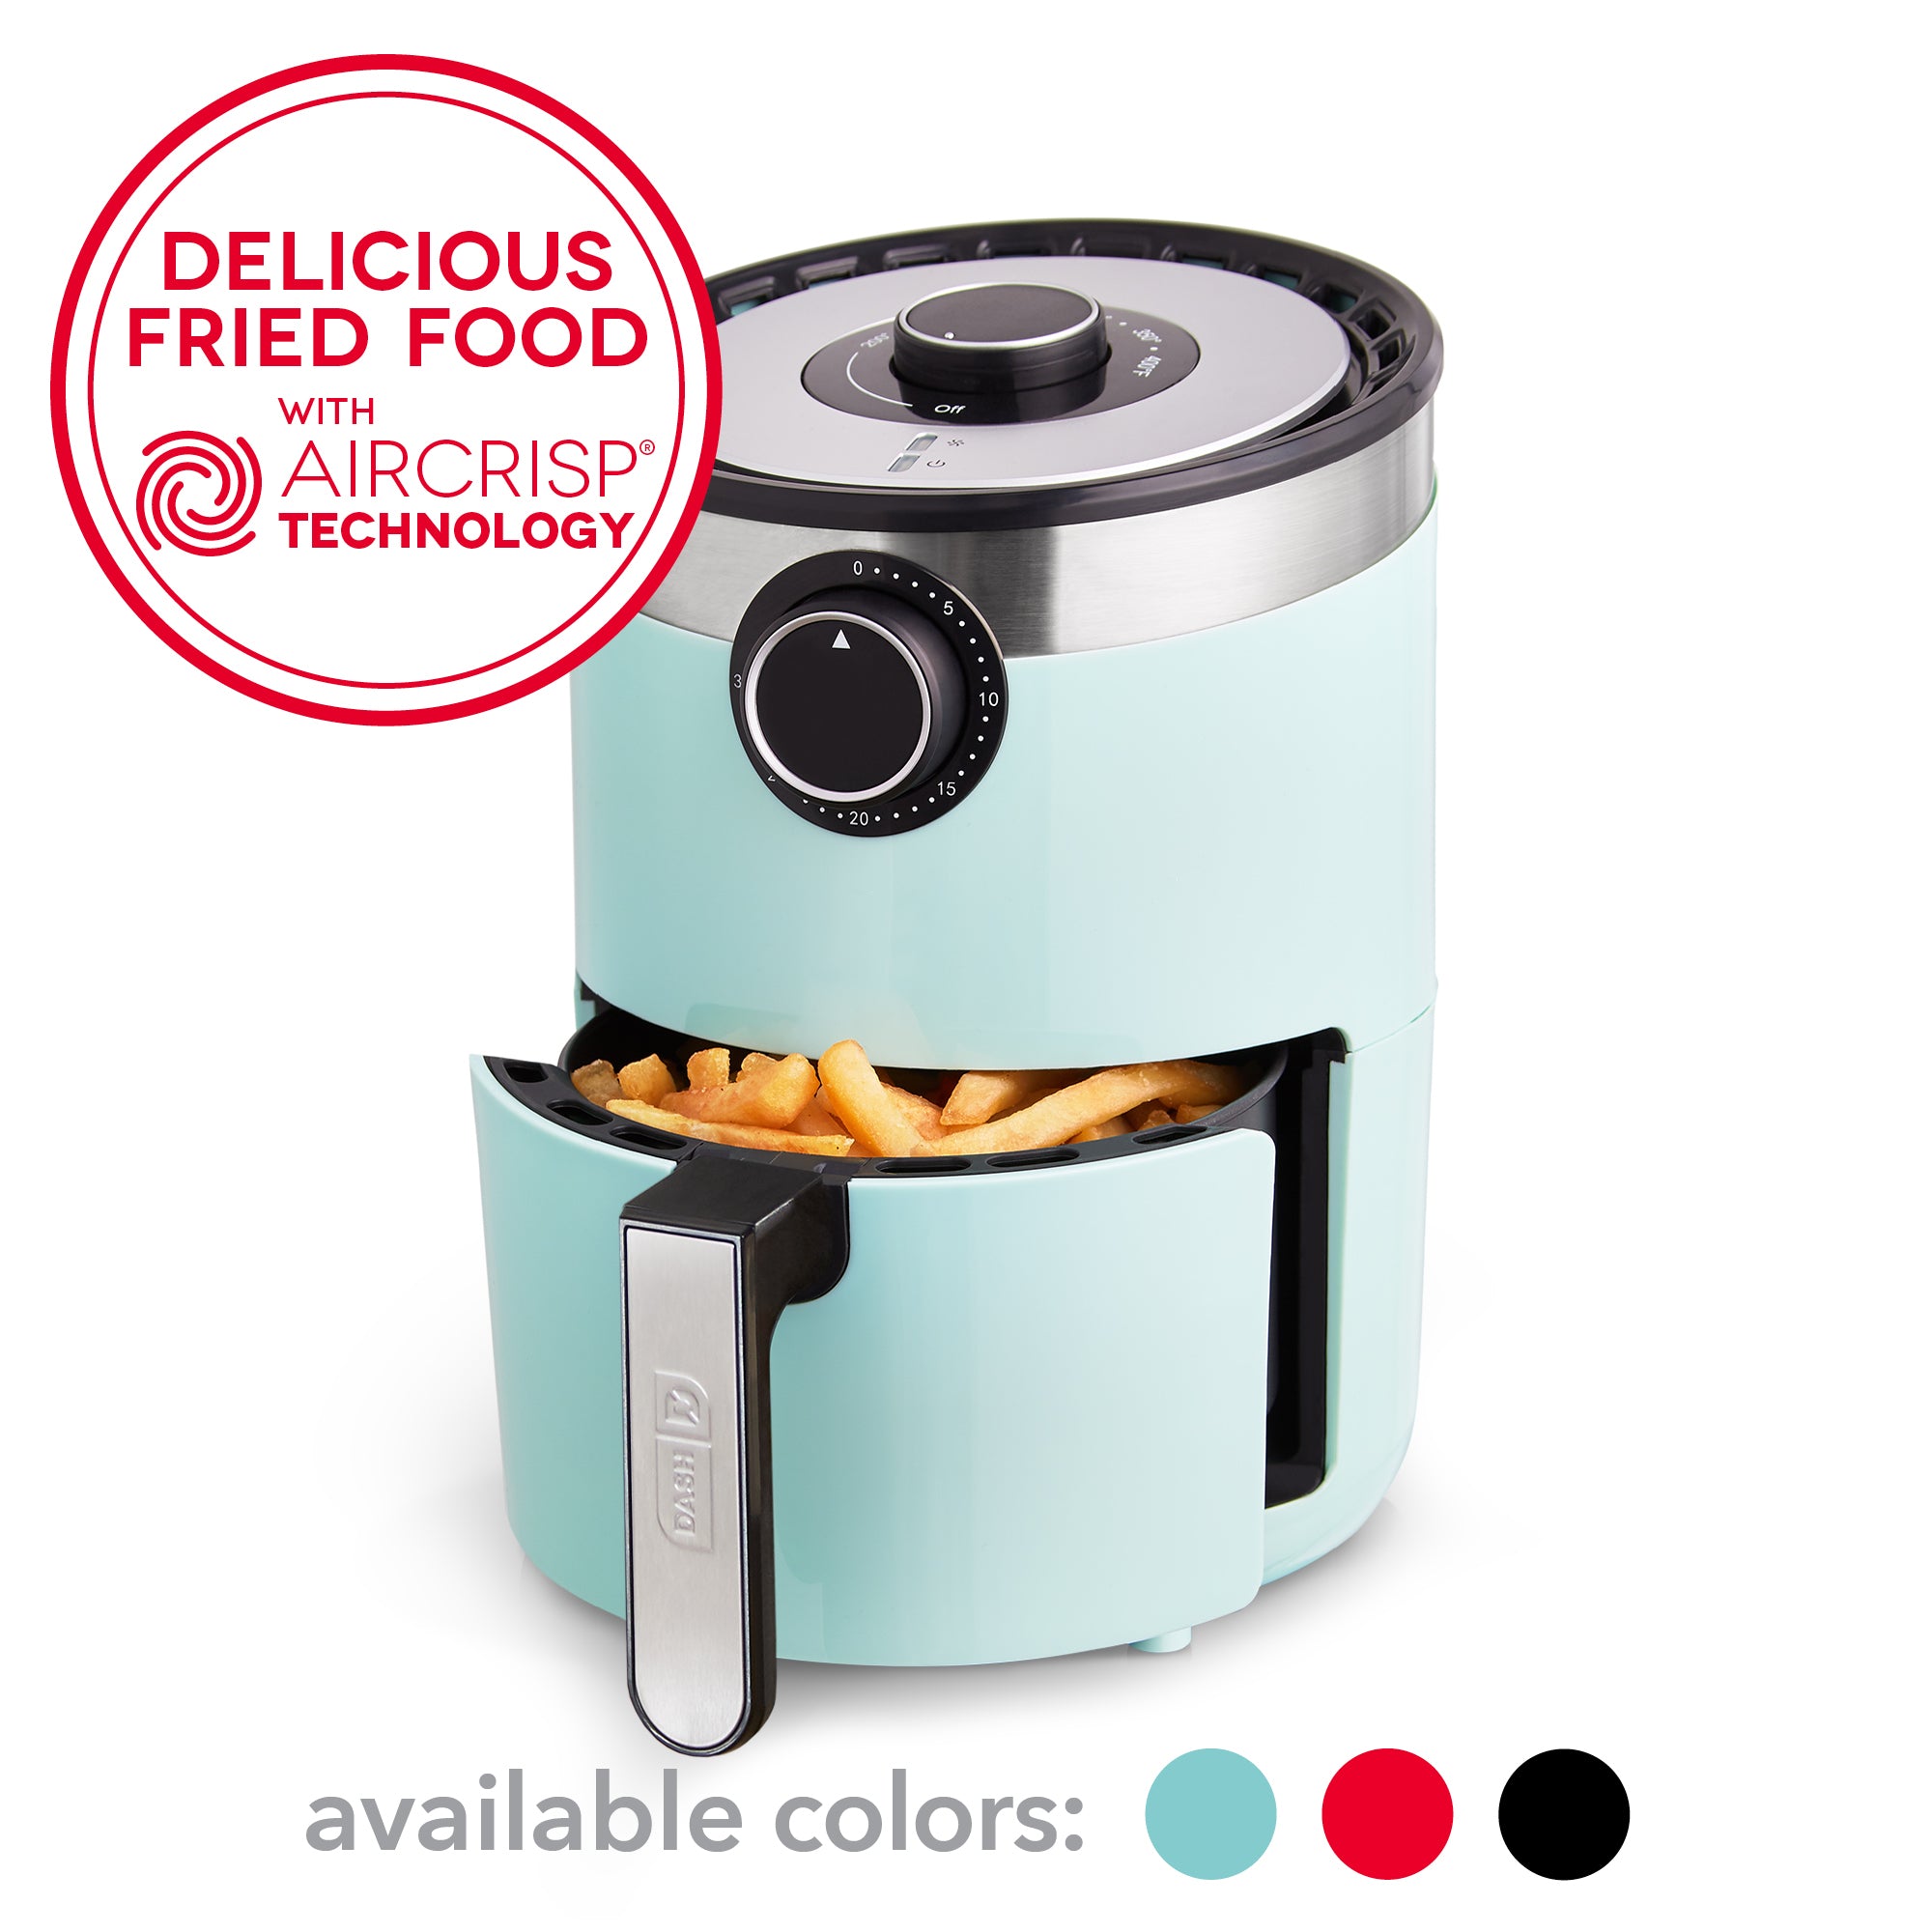 Dash Compact Air Fryer, Atg Archive